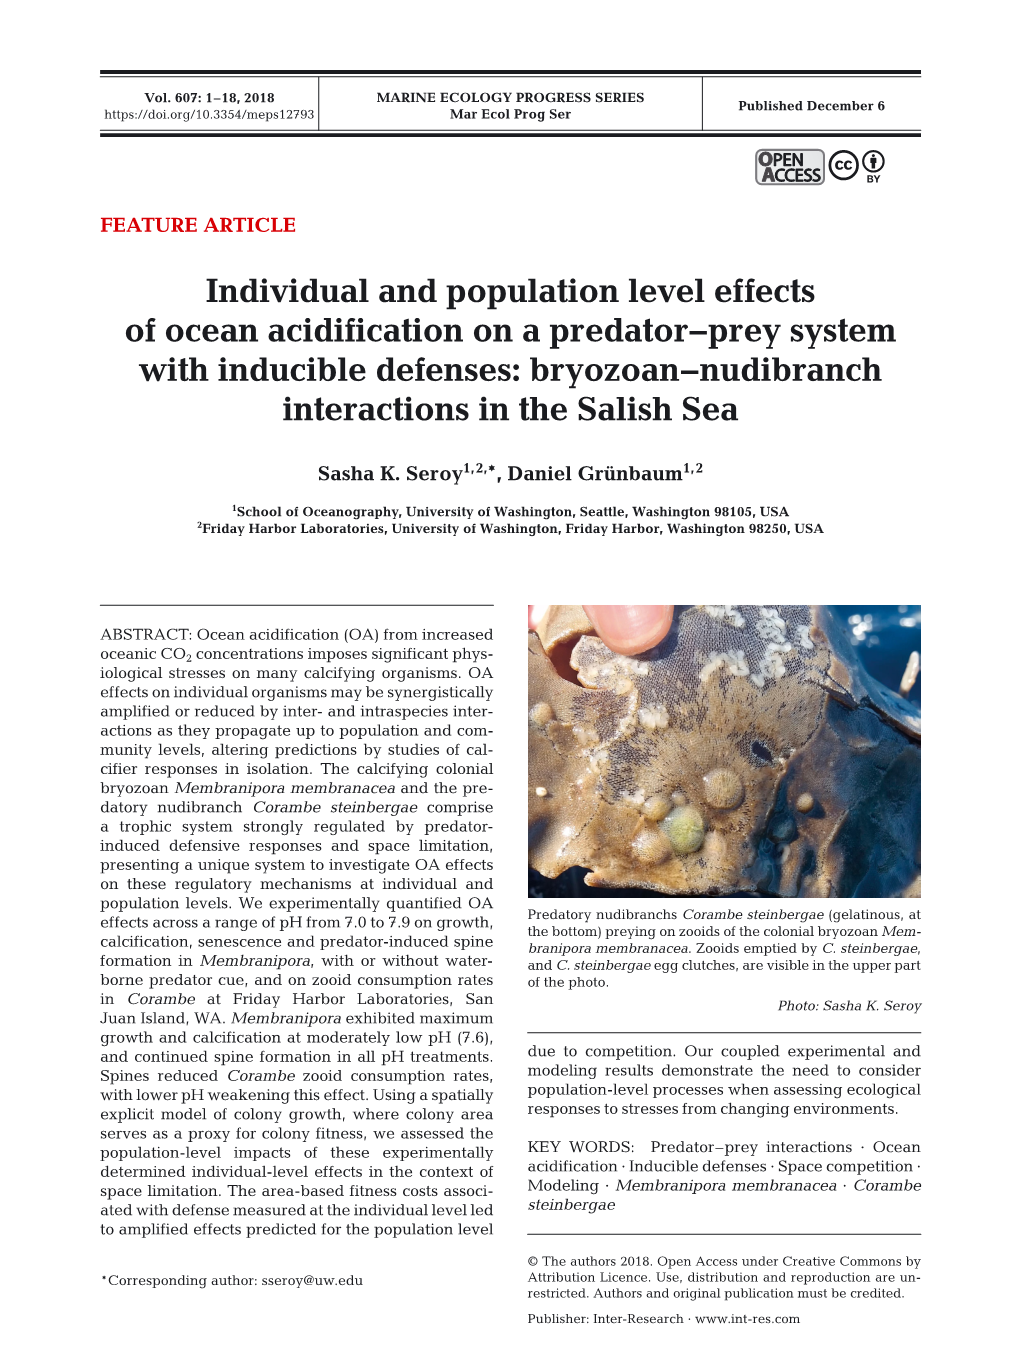 Individual and Population Level Effects of Ocean Acidification on a Predator−Prey System with Inducible Defenses: Bryozoan−Nudibranch Interactions in the Salish Sea